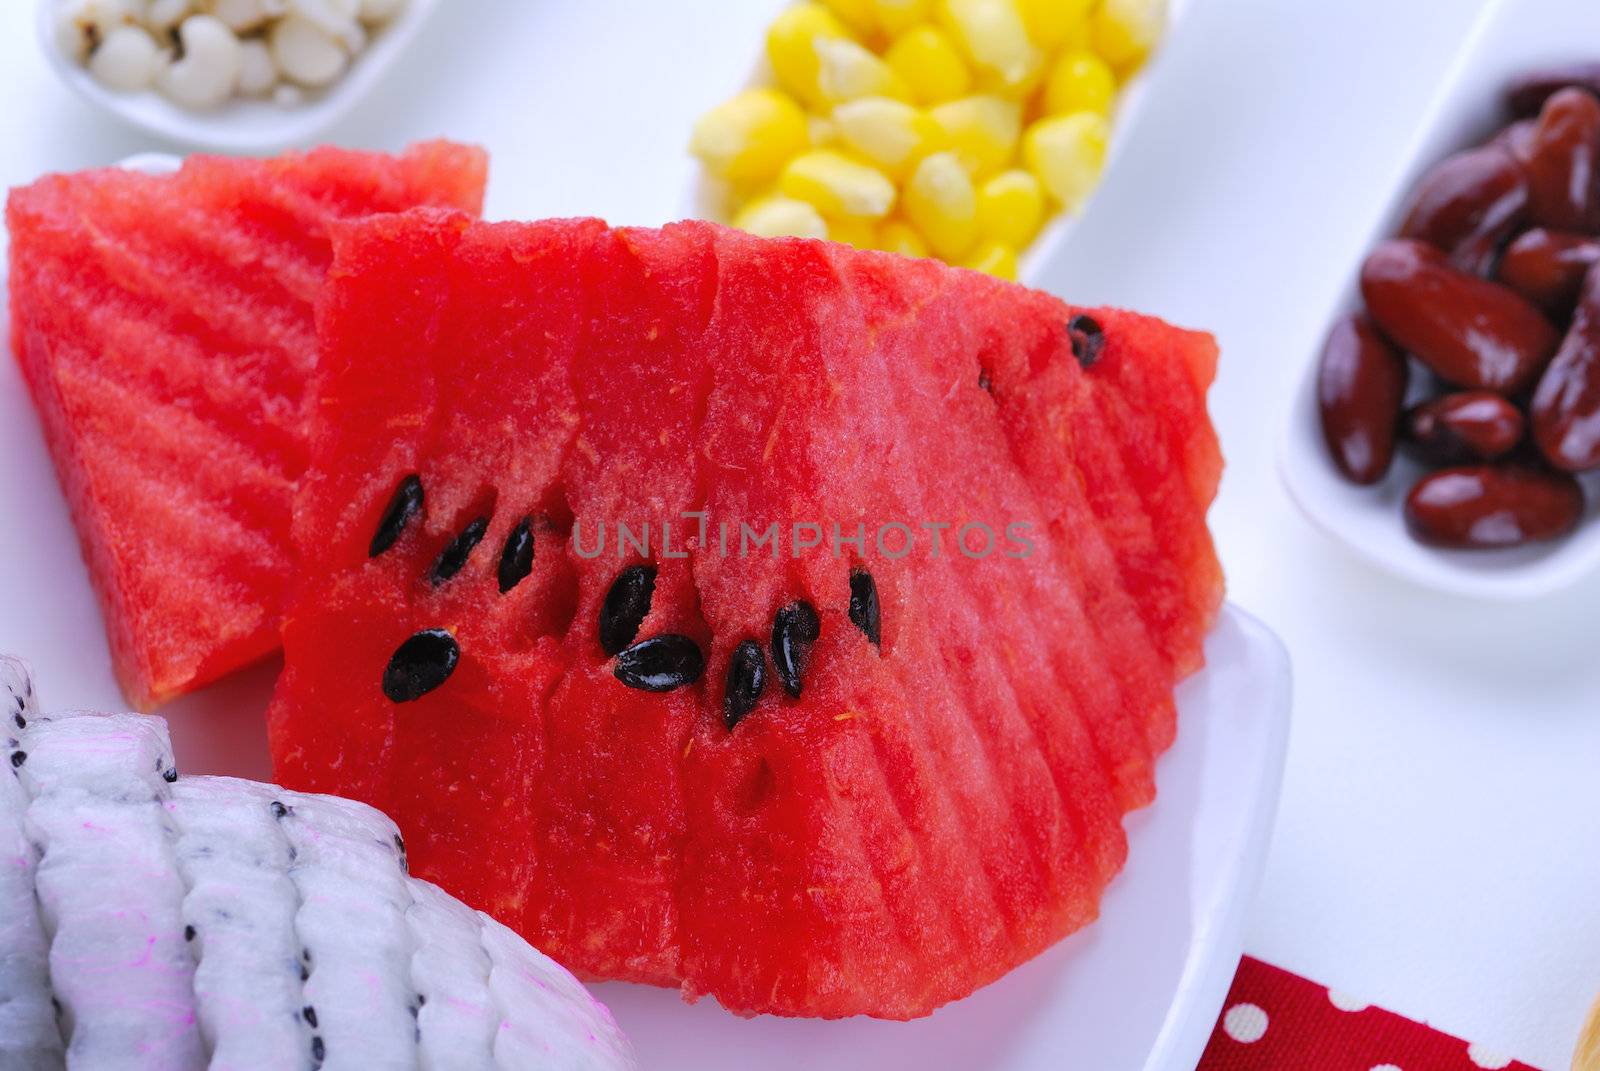 pieces of refreshing watermelon and dragon fruit